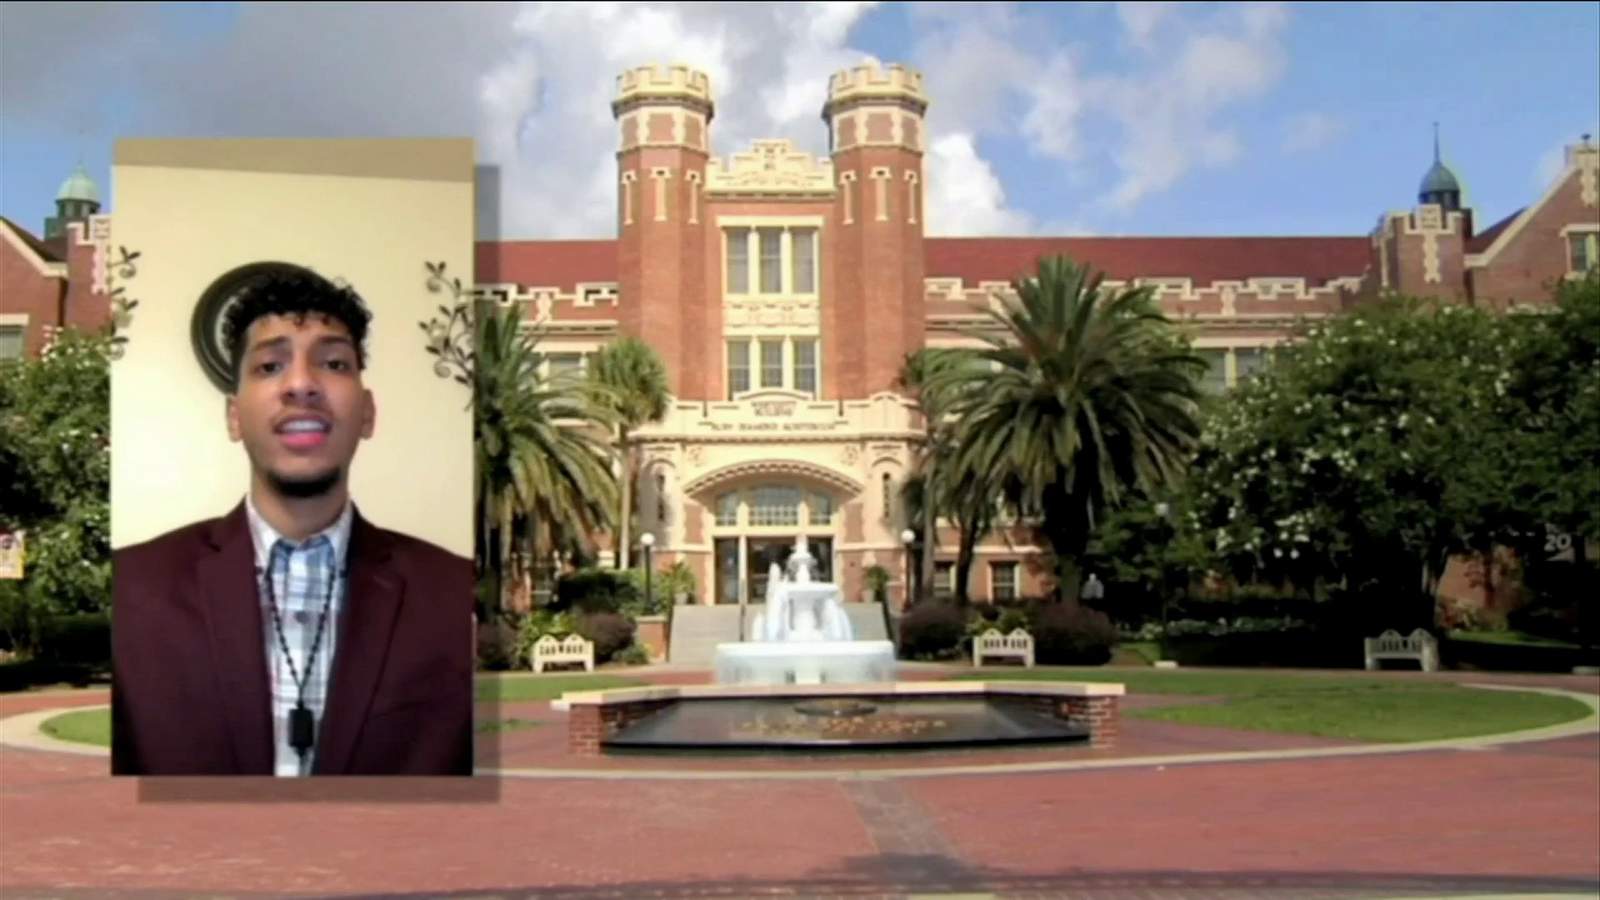 FSU Student Senate may oust 2nd president this month